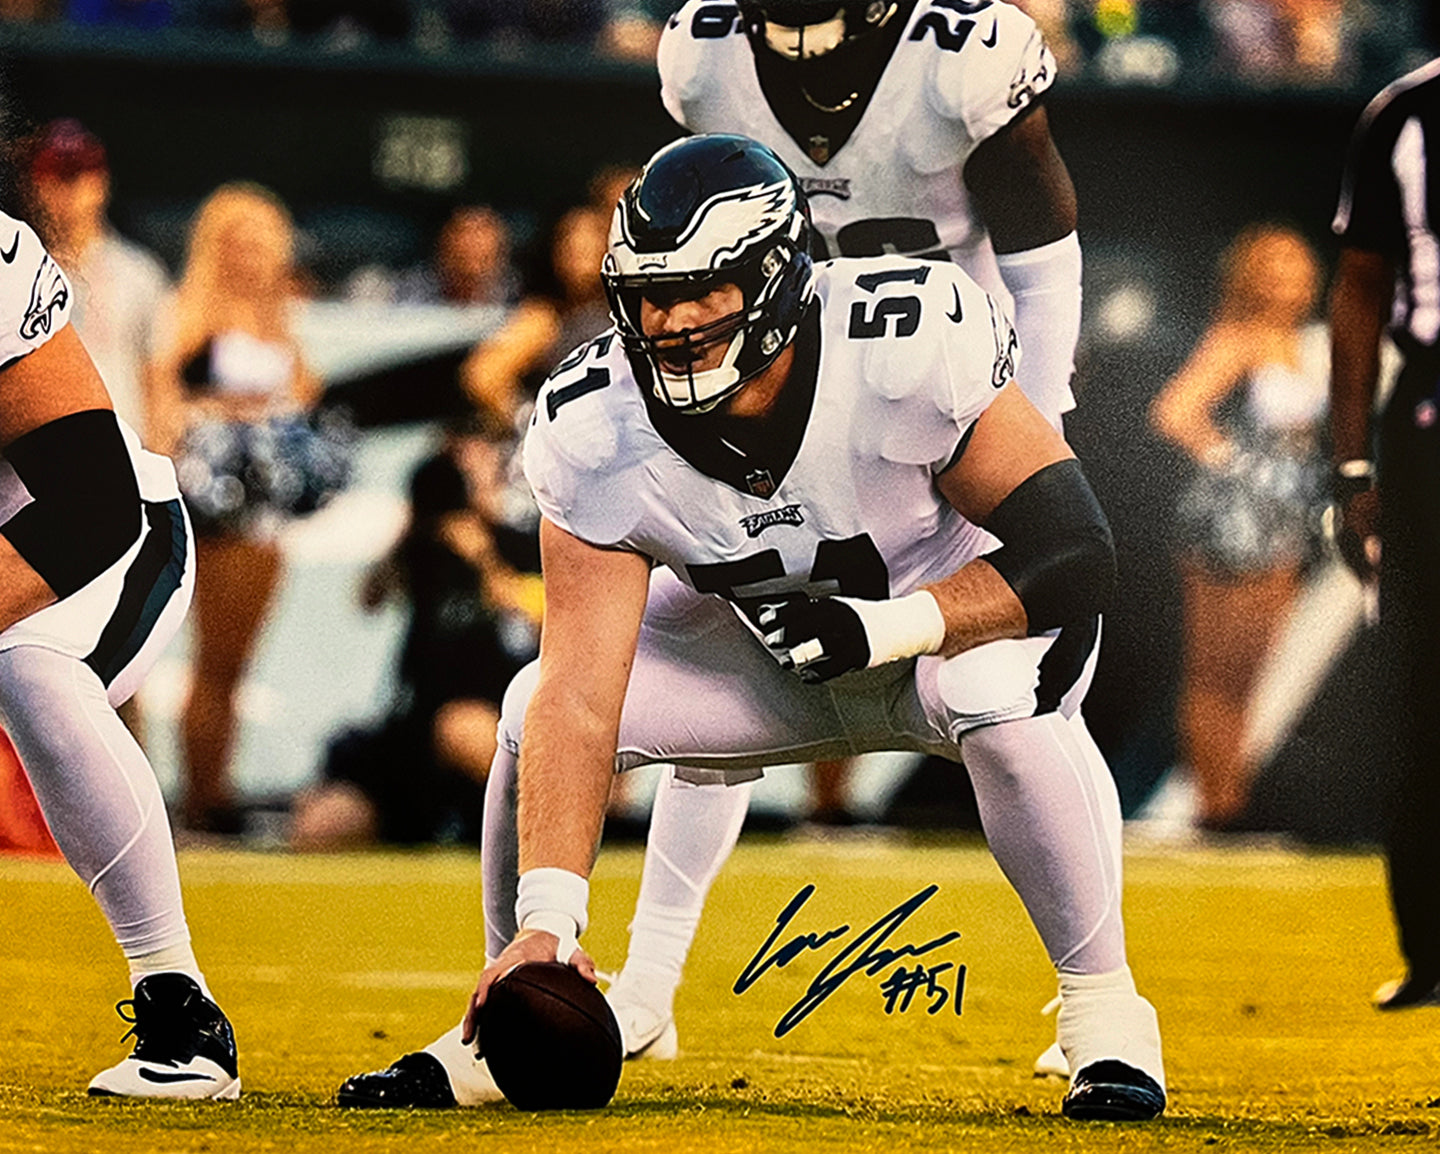 Cam Jurgens in Stance Philadelphia Eagles Autographed 11" x 14" Football Photo - Dynasty Sports & Framing 